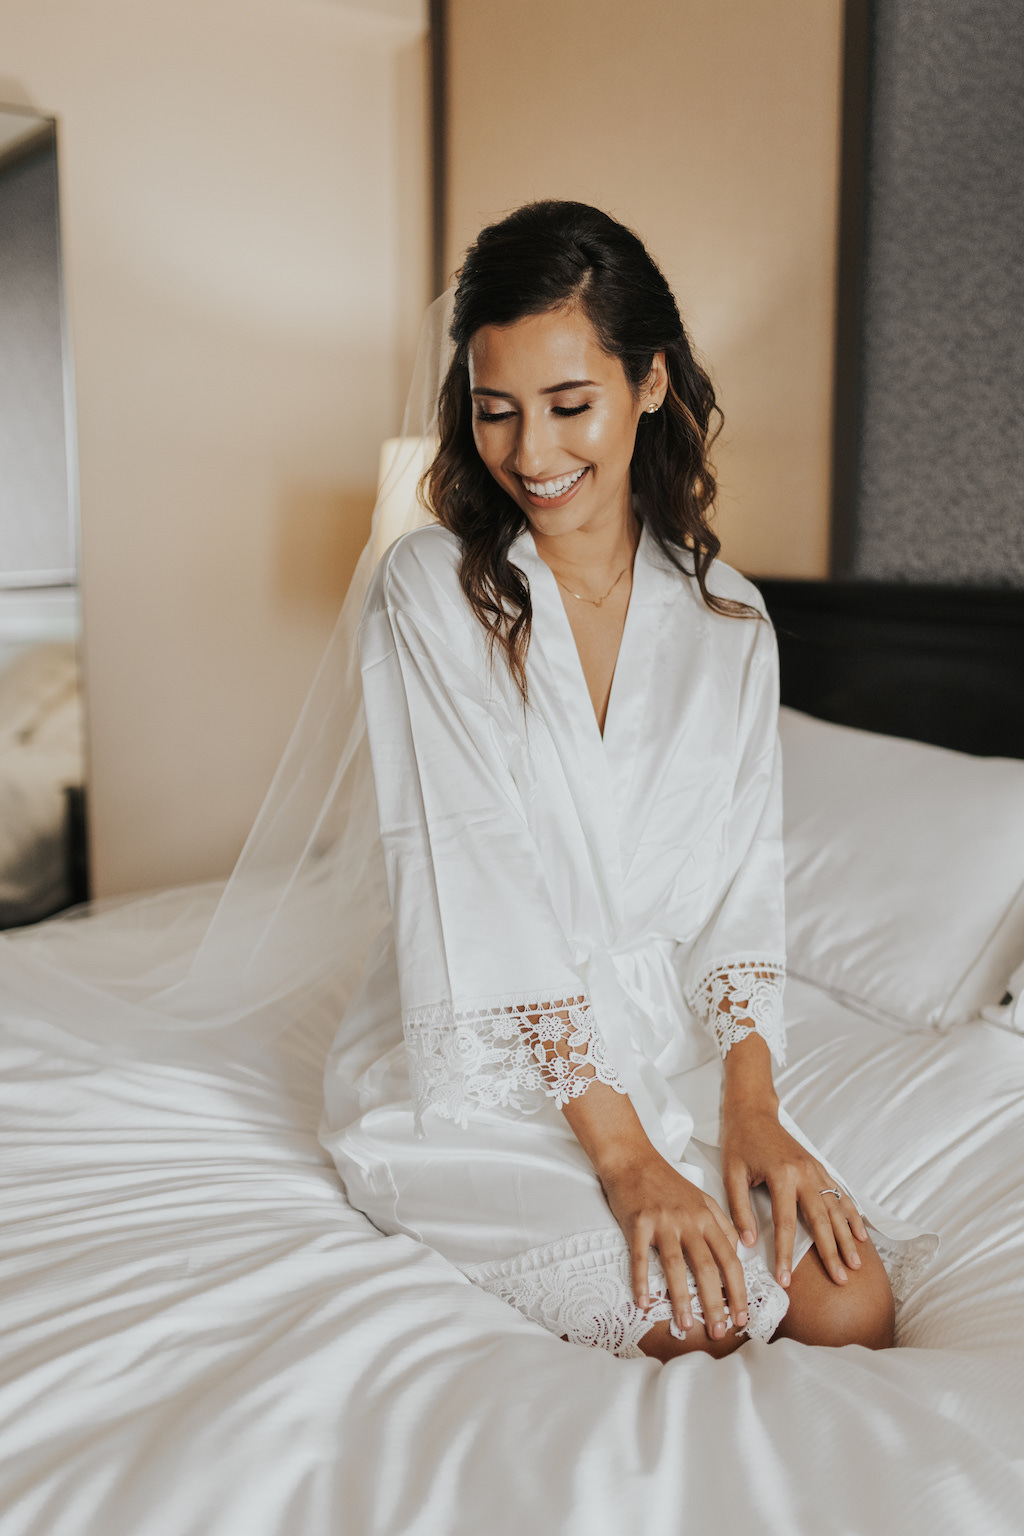 Bride Beauty Wedding Portrait on Hotel Bed Wearing Silk White and Lace Robe and Veil